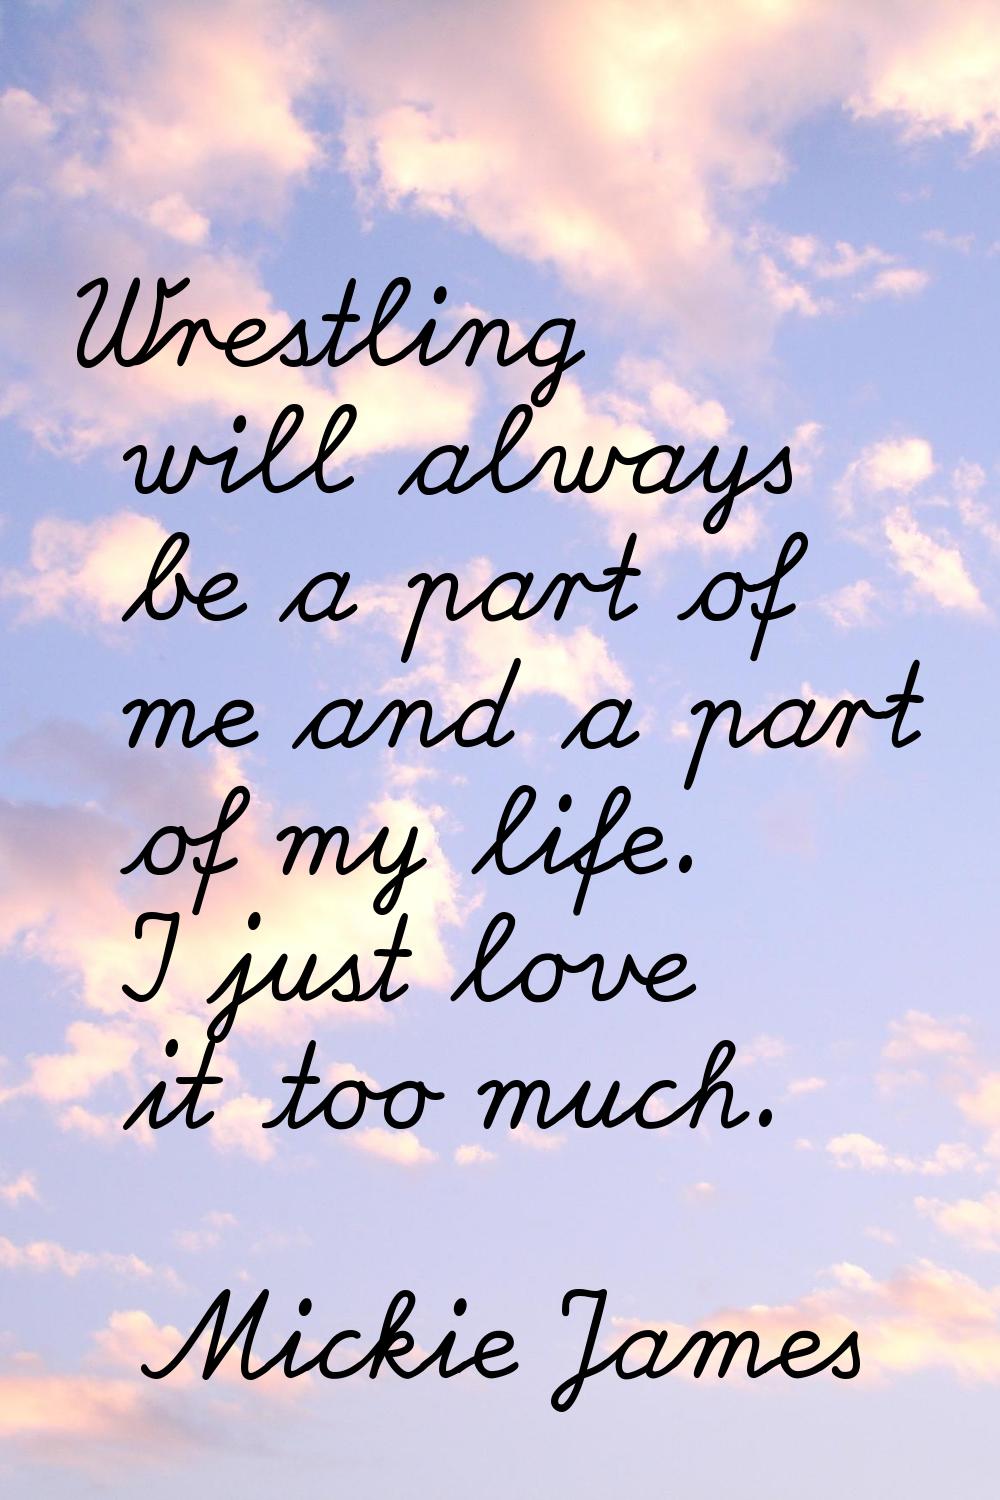 Wrestling will always be a part of me and a part of my life. I just love it too much.